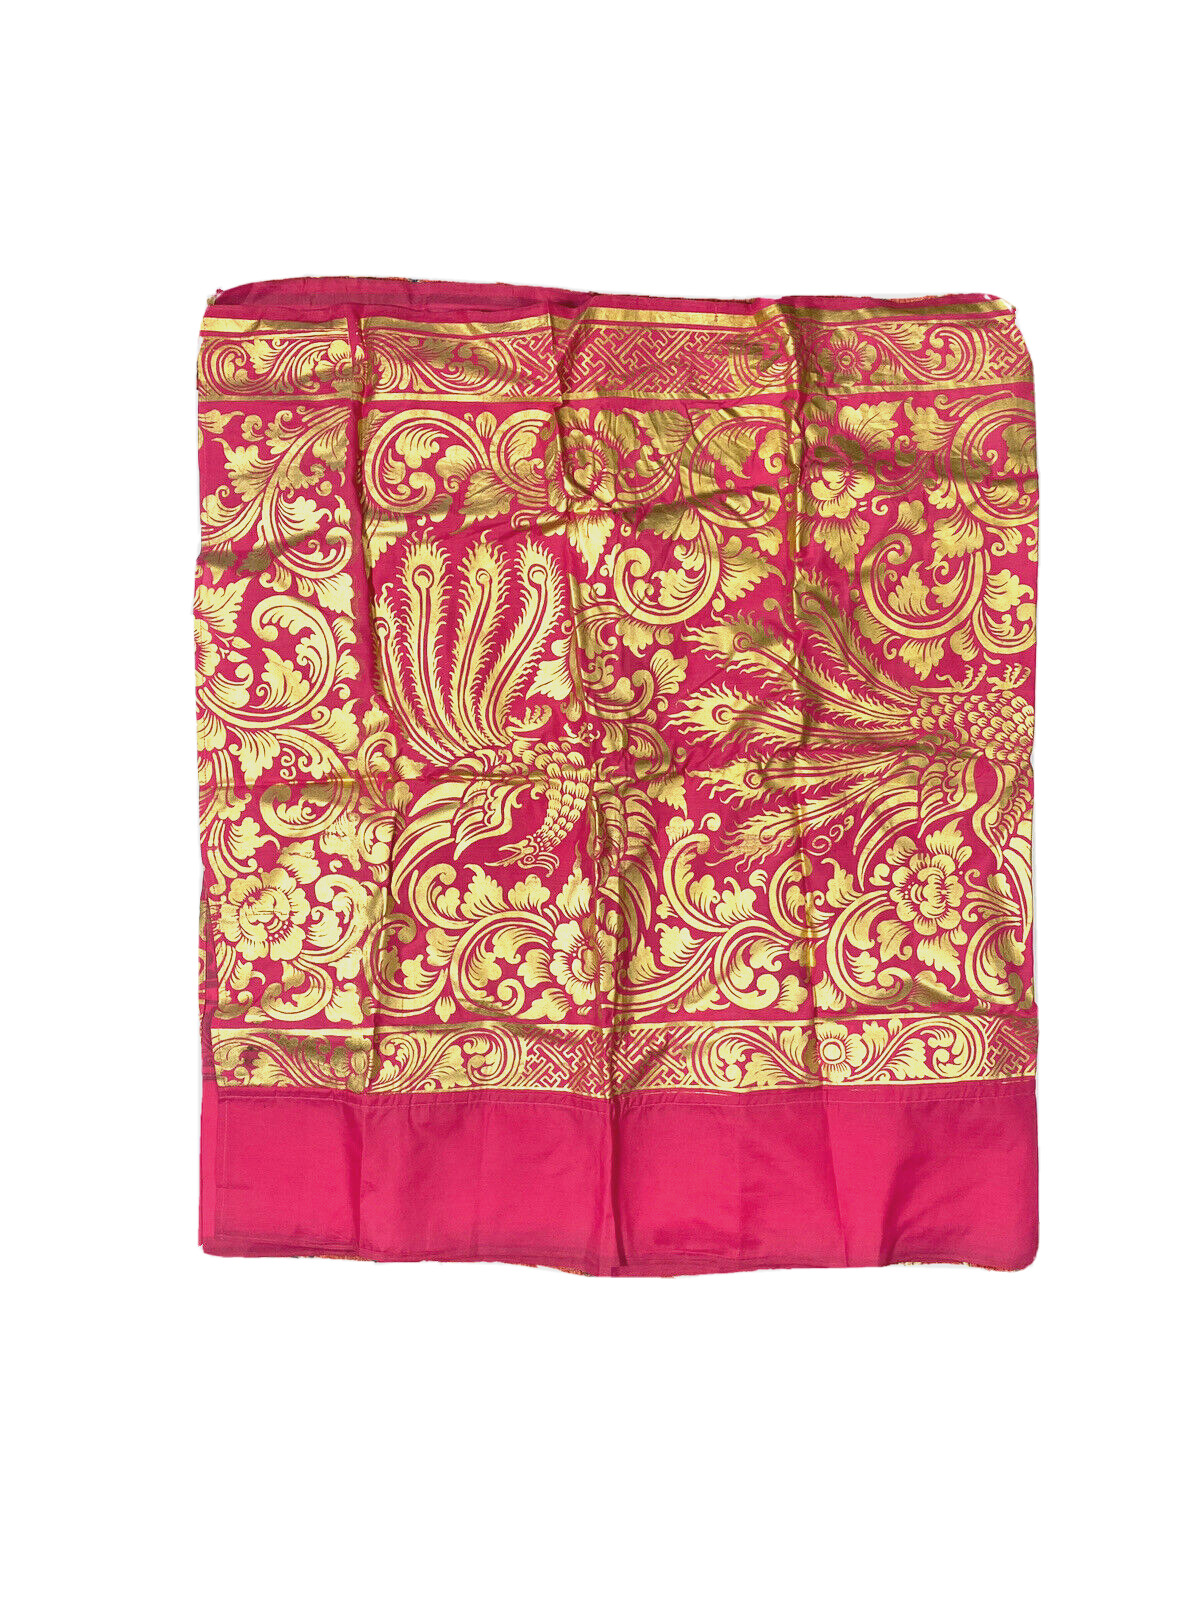 Beautiful Fuchsia Pink Gold Cloth Textile Brocade Fabric Painted Indian Linens